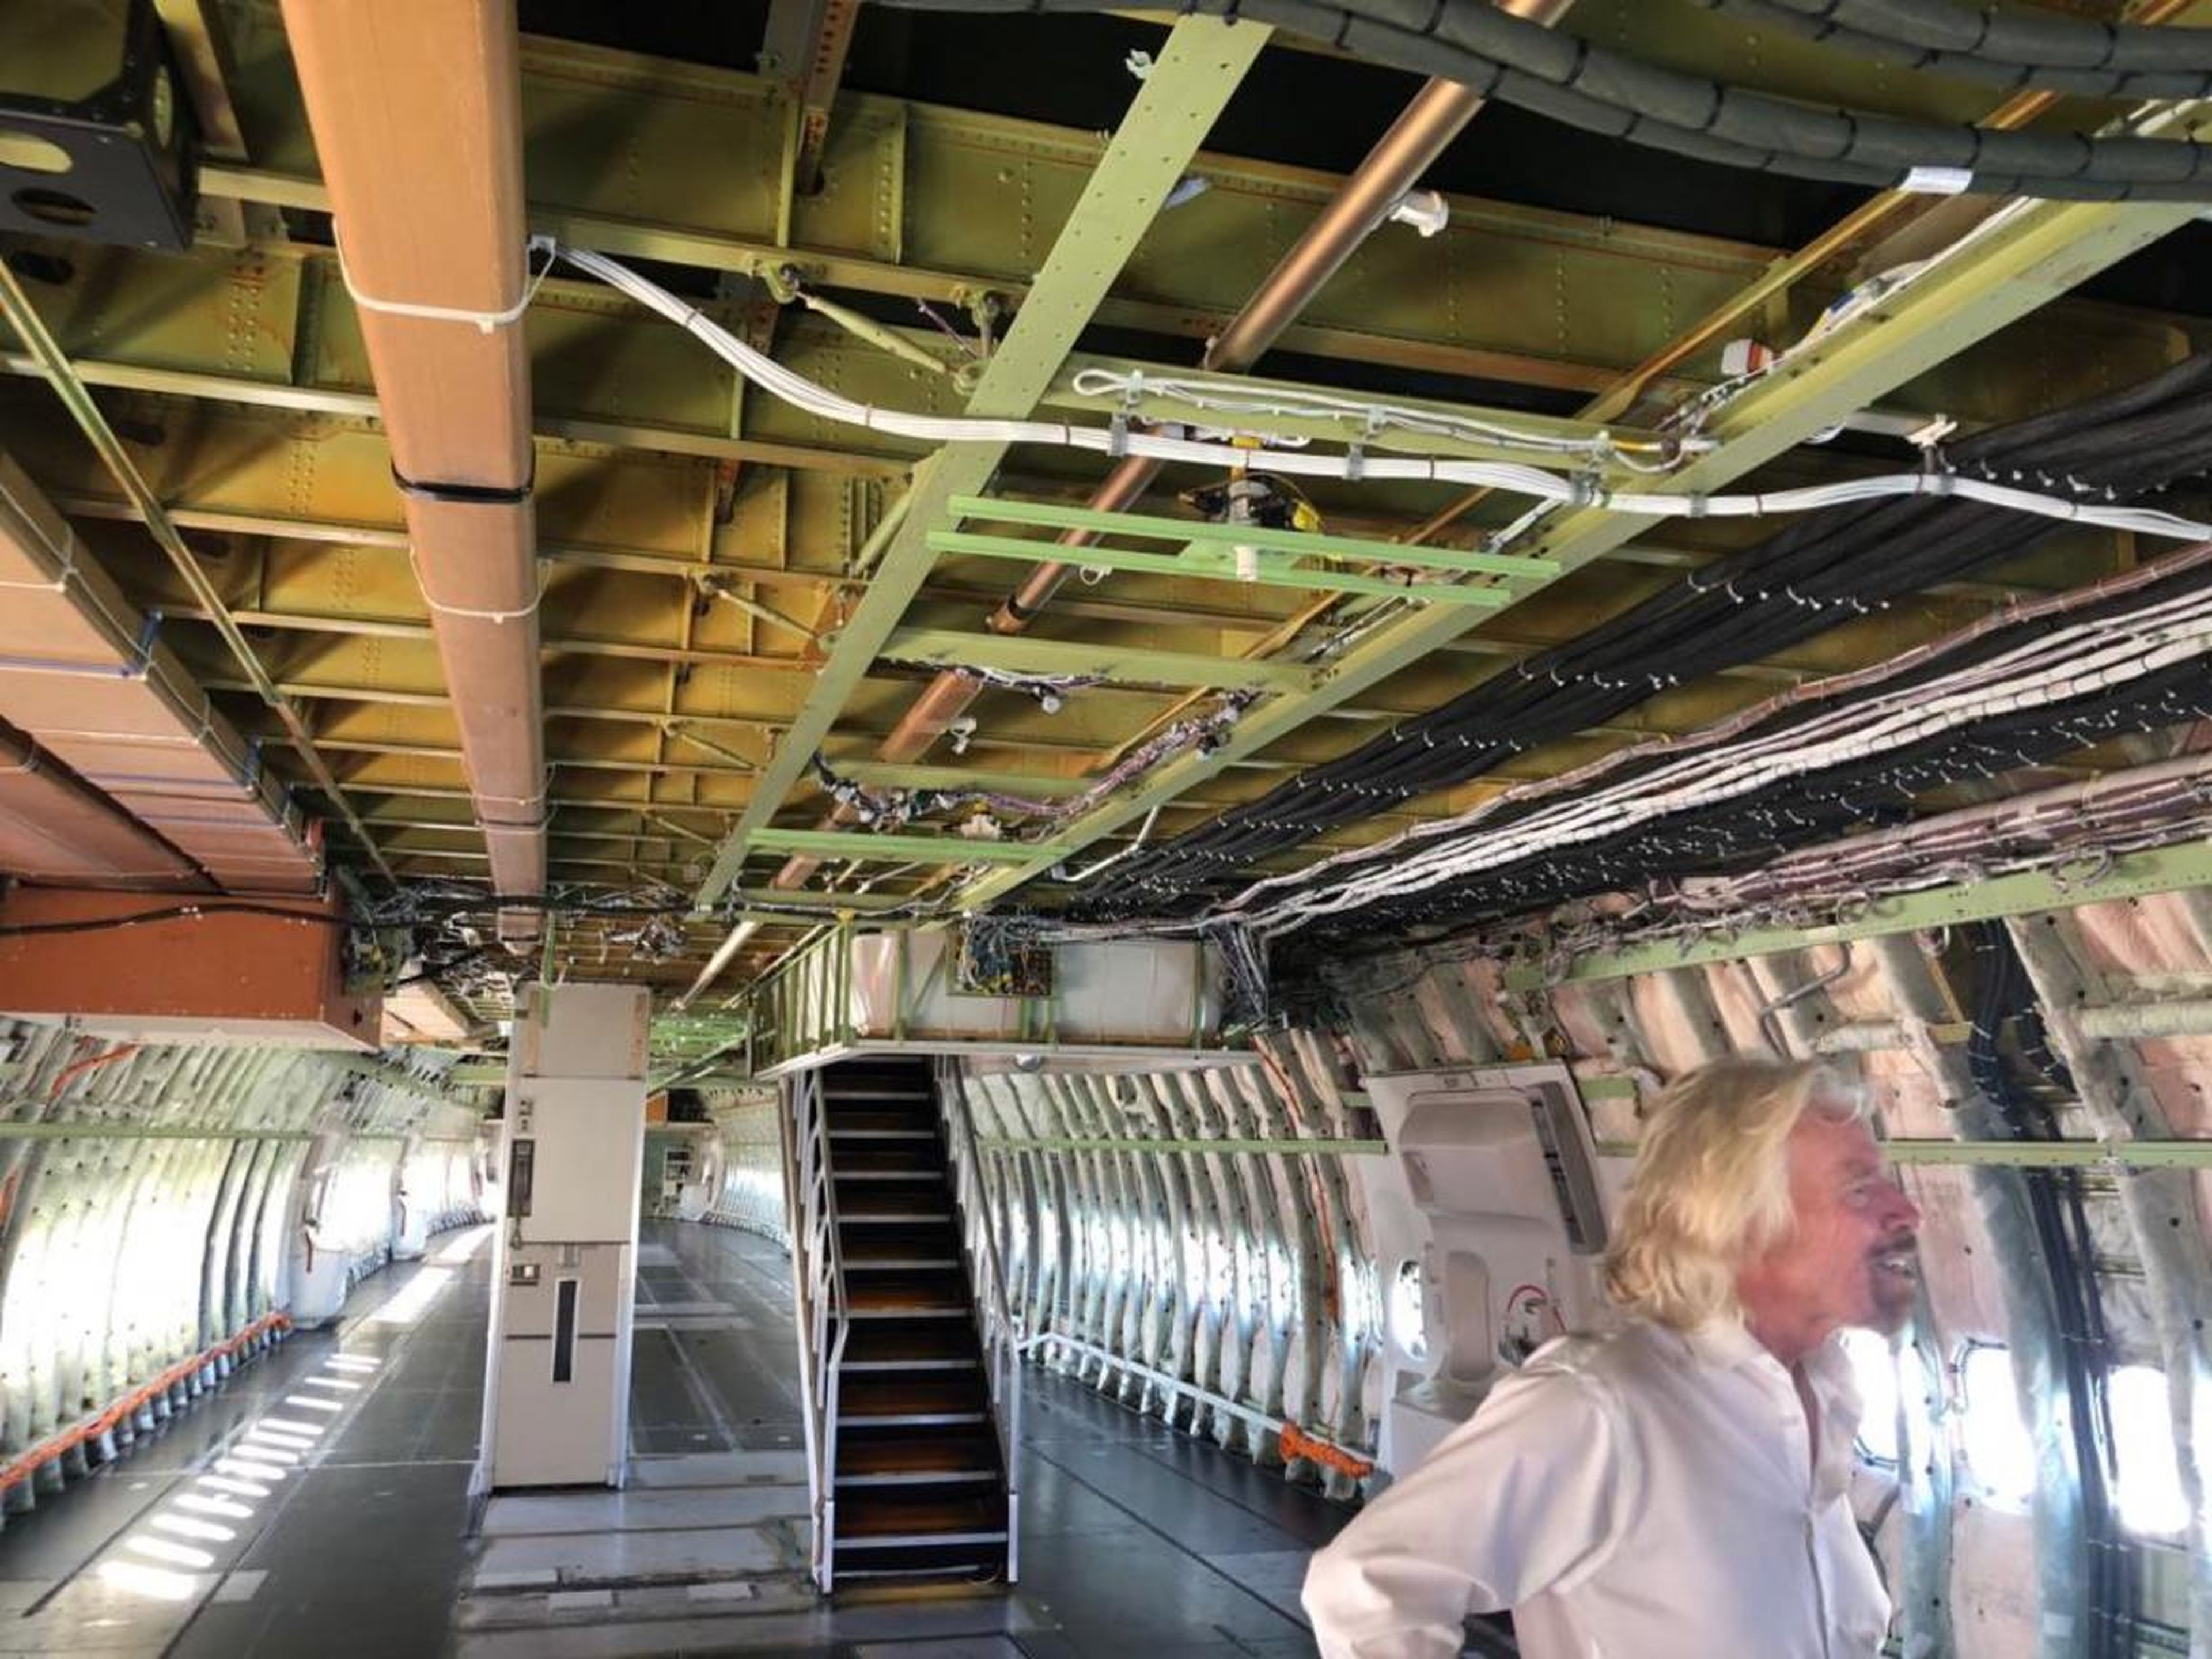 Sir Richard Branson inside Cosmic Girl, which has been stripped down to reduce weight and allow Virgin Orbit to attach LauncherOne to its port-side wing.